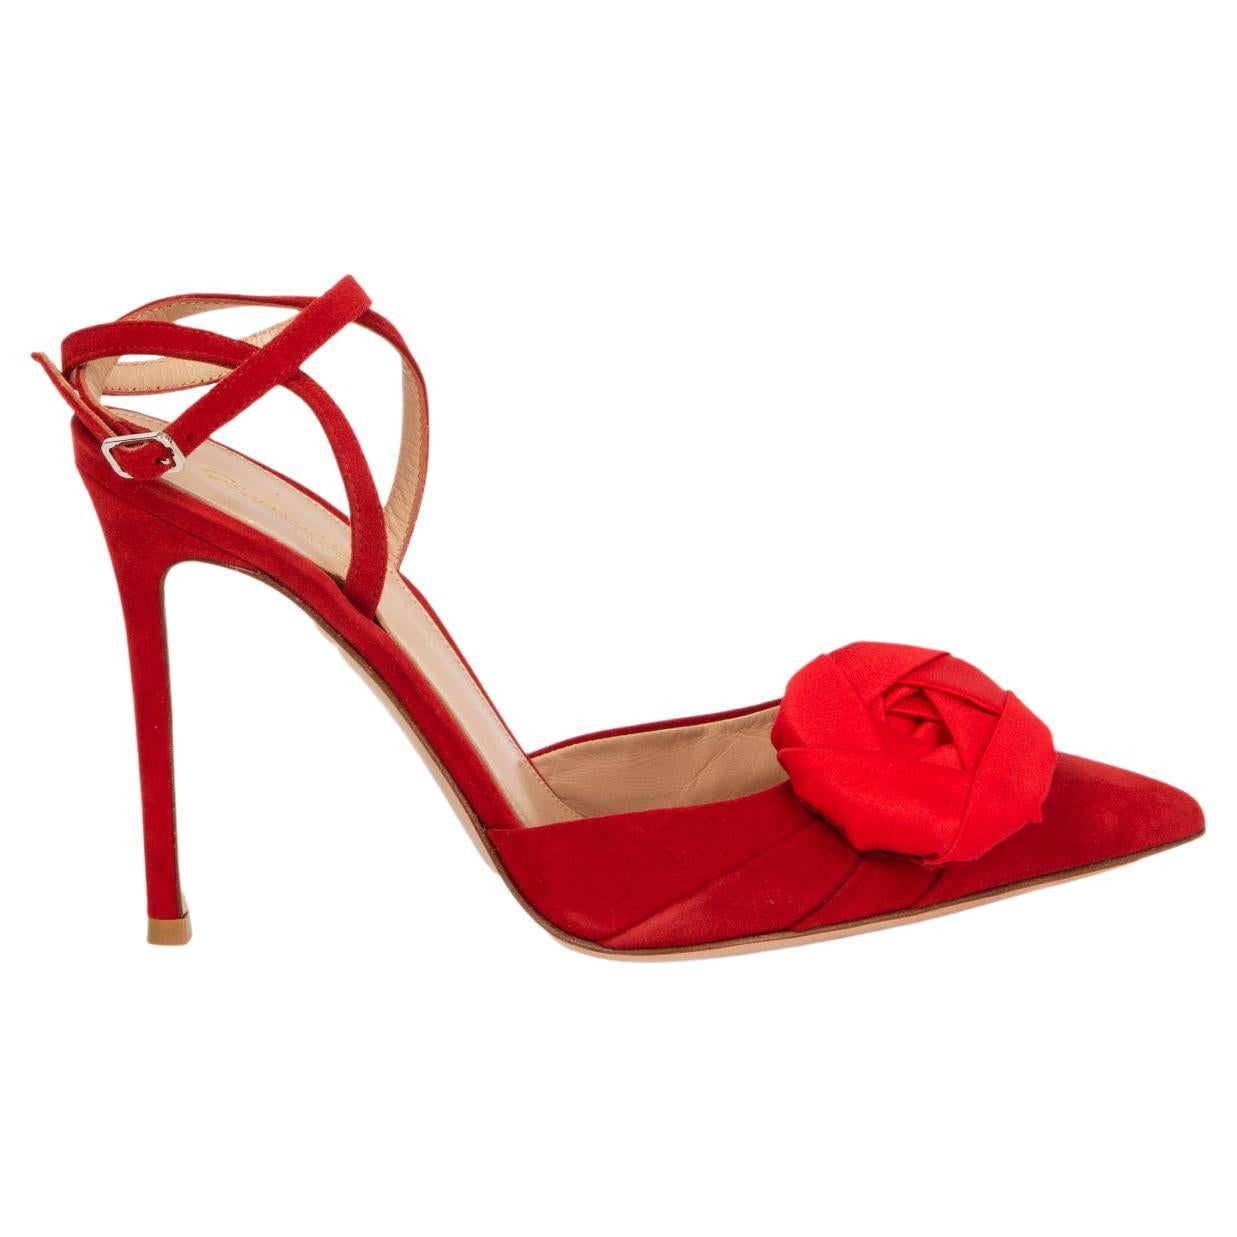 GIANVITO ROSSI Chaussures en daim rouge satin ROSE ANKLE STRAP PUMPS 37